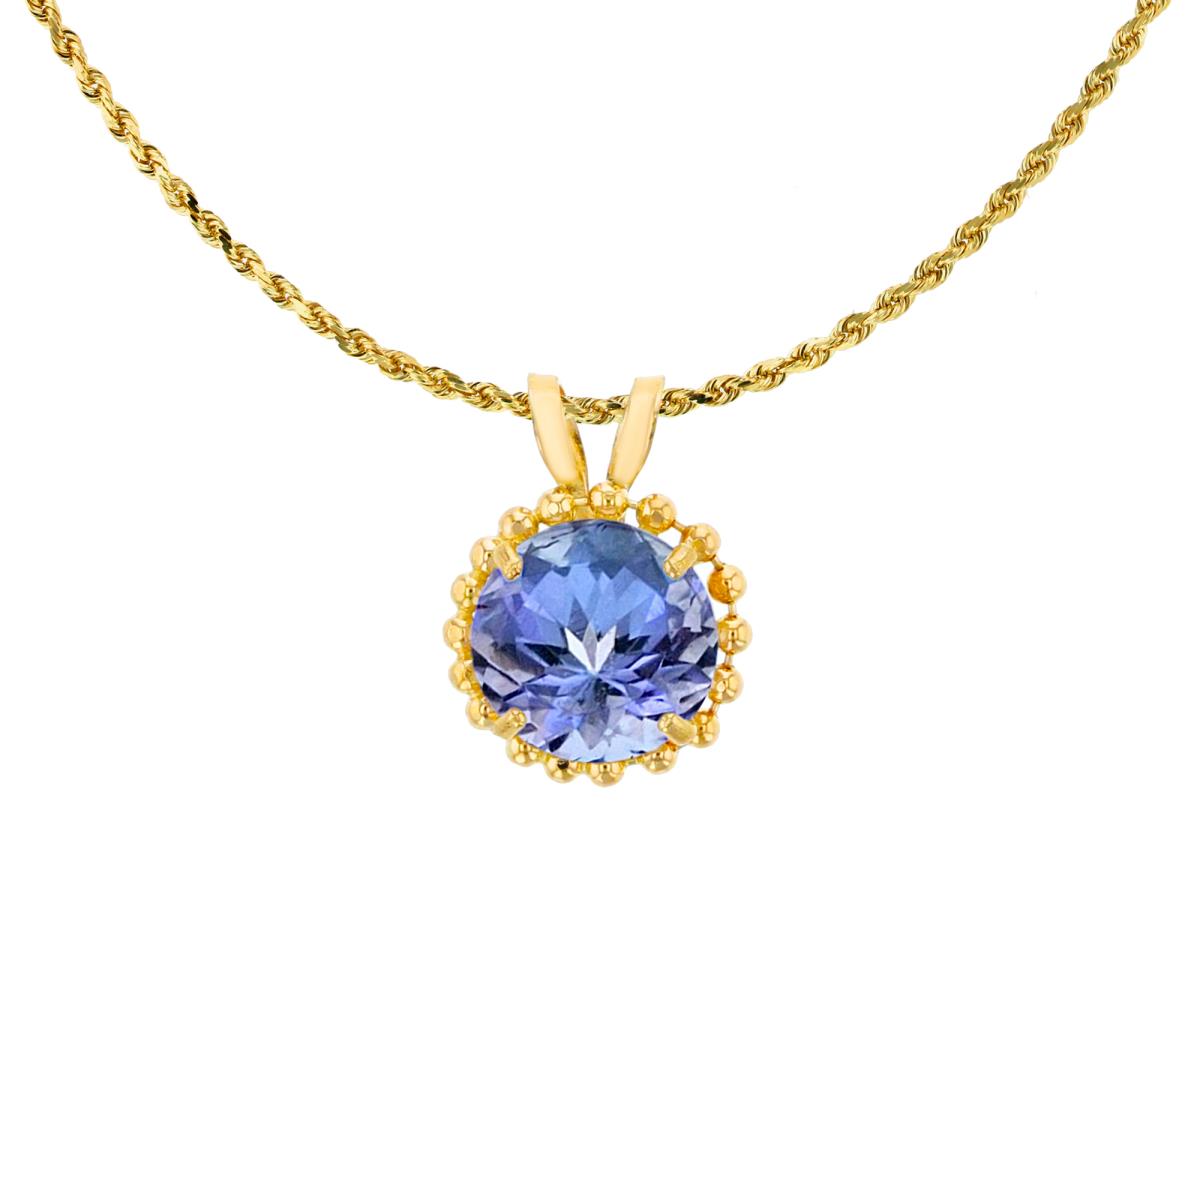 10K Yellow Gold 6mm Rd Cut Tanzanite with Bead Frame Rabbit Ear 18" Necklace